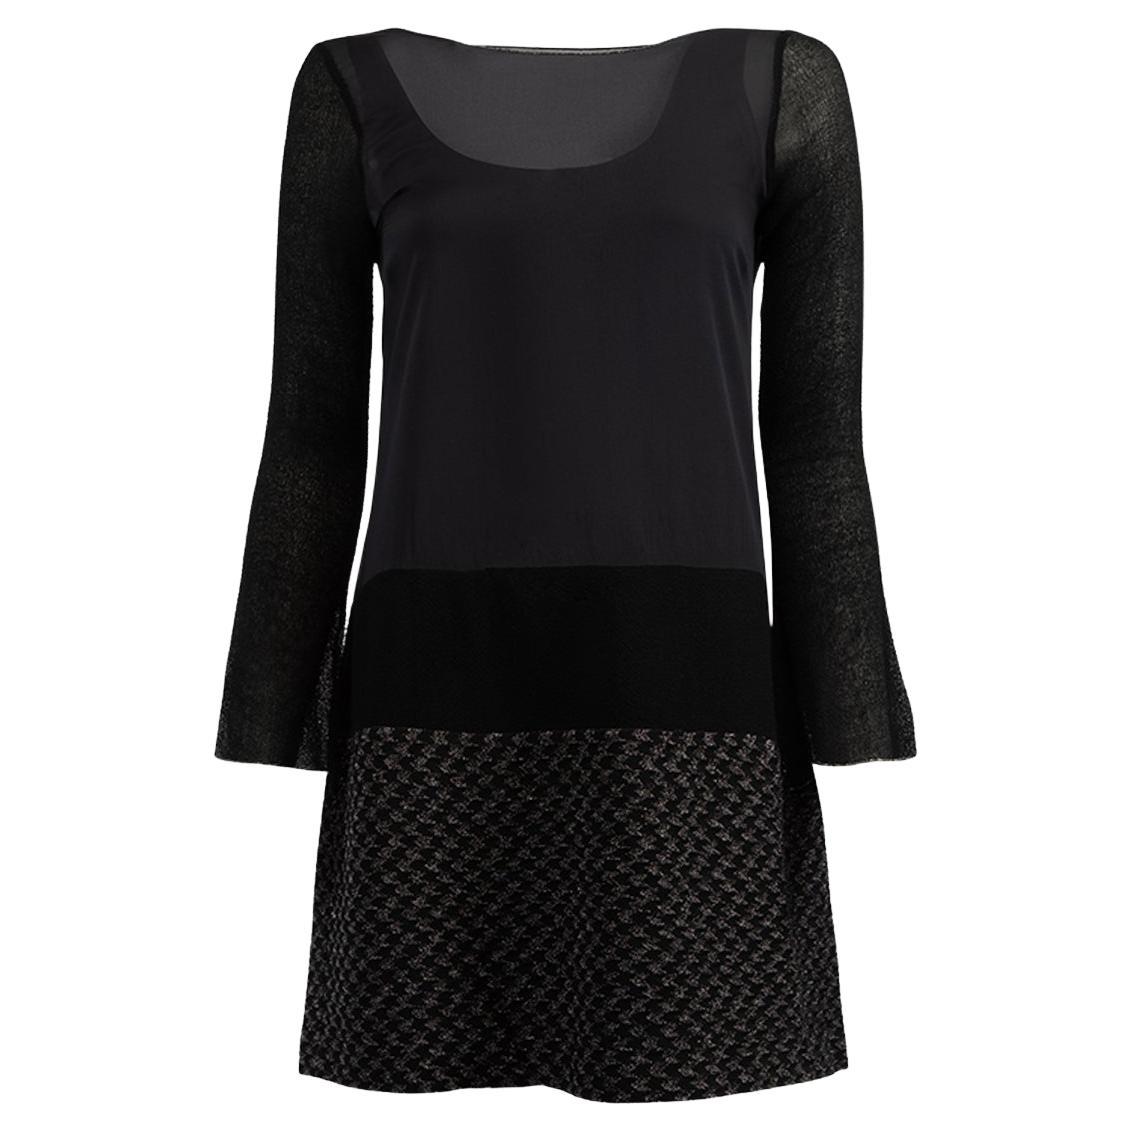 Pre-Loved Missoni Women's Black Mesh Layered Houndstooth Panel Dress For Sale